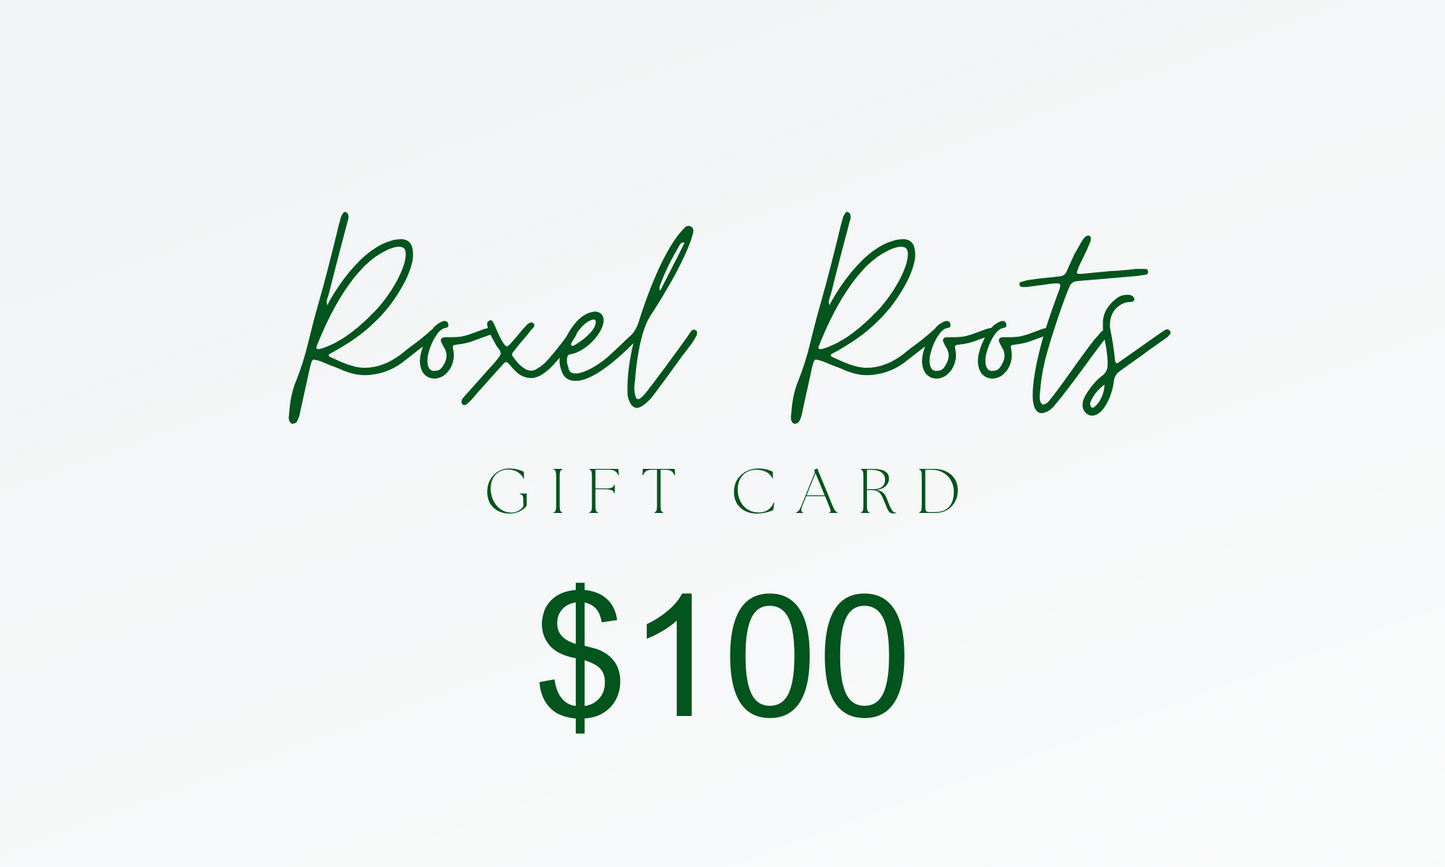 Roxel Roots - Gift Card